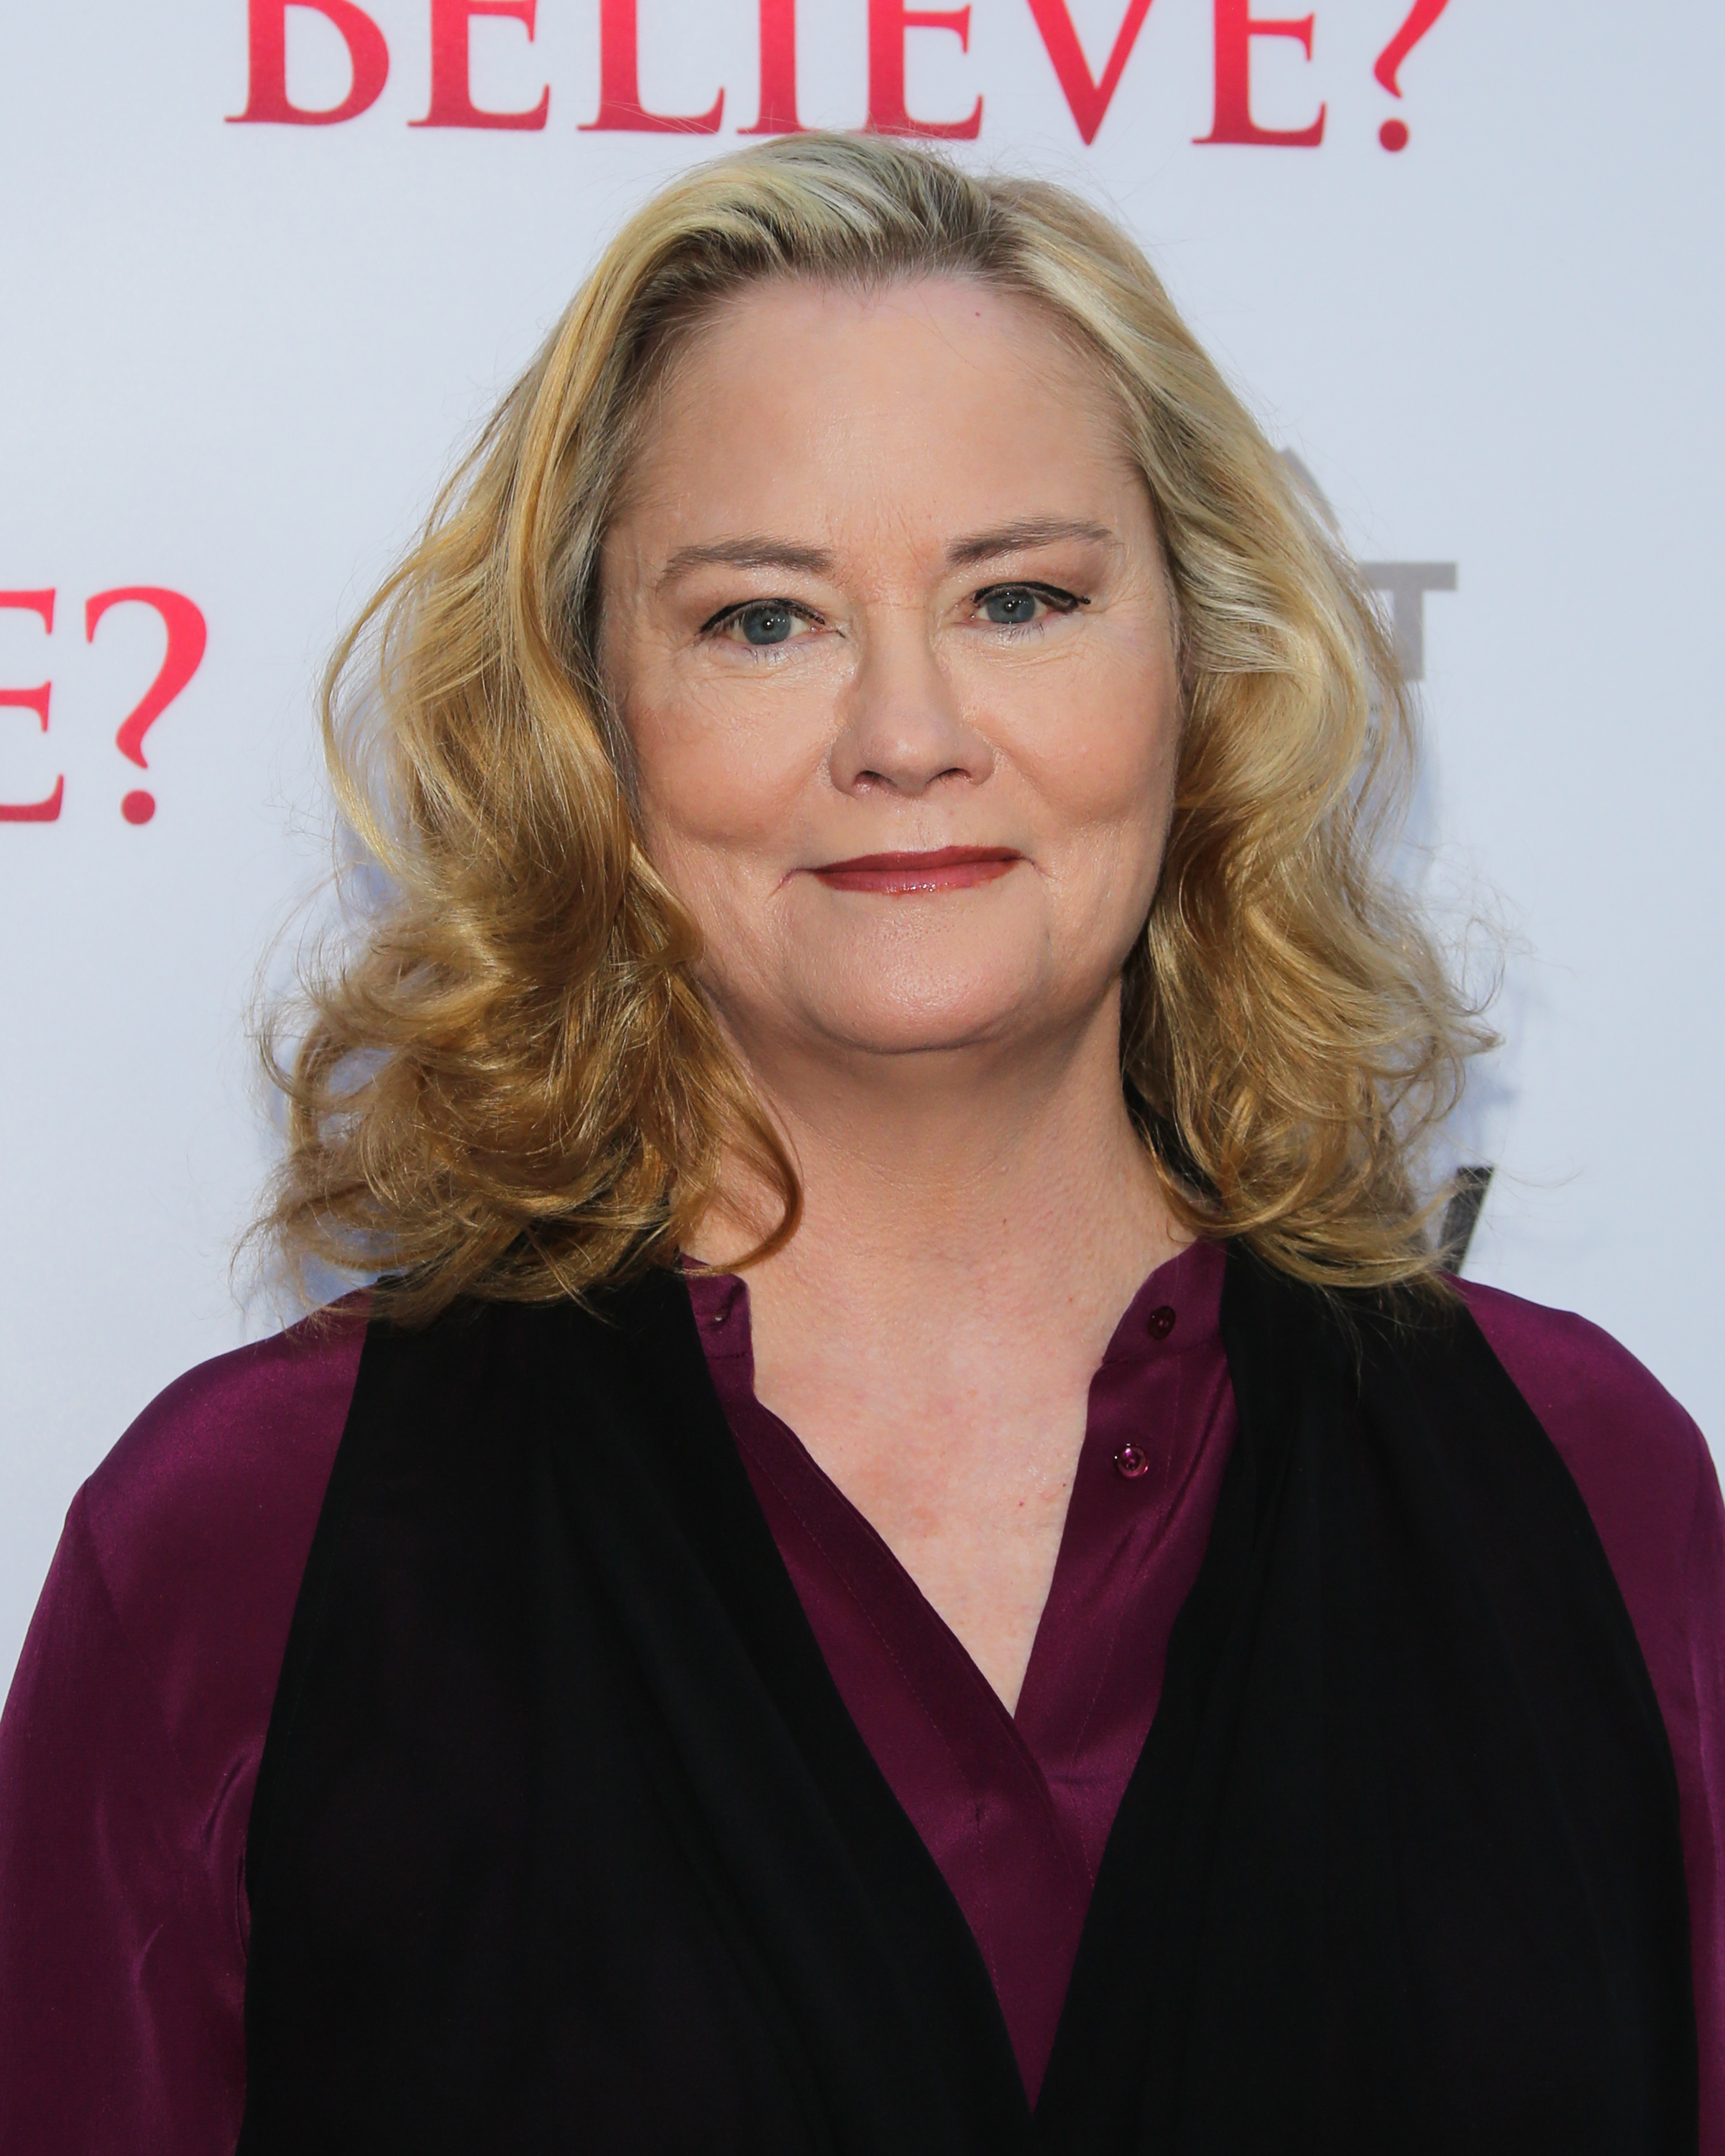 Cybill Shepherd at the "Do You Believe?" premiere on March 16, 2015, in Hollywood, California. | Source: Getty Images